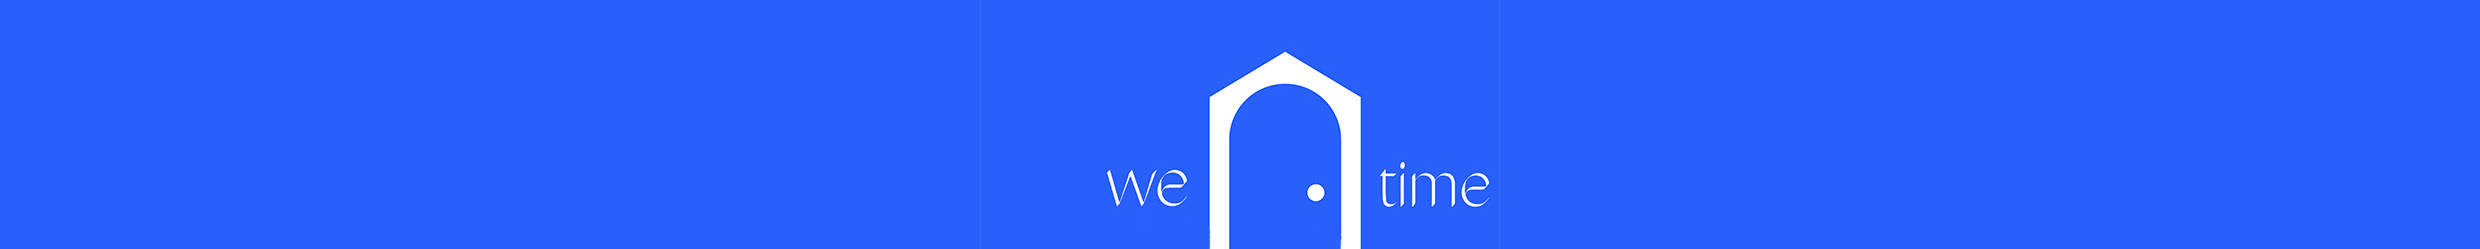 We Time Audio House's profile banner